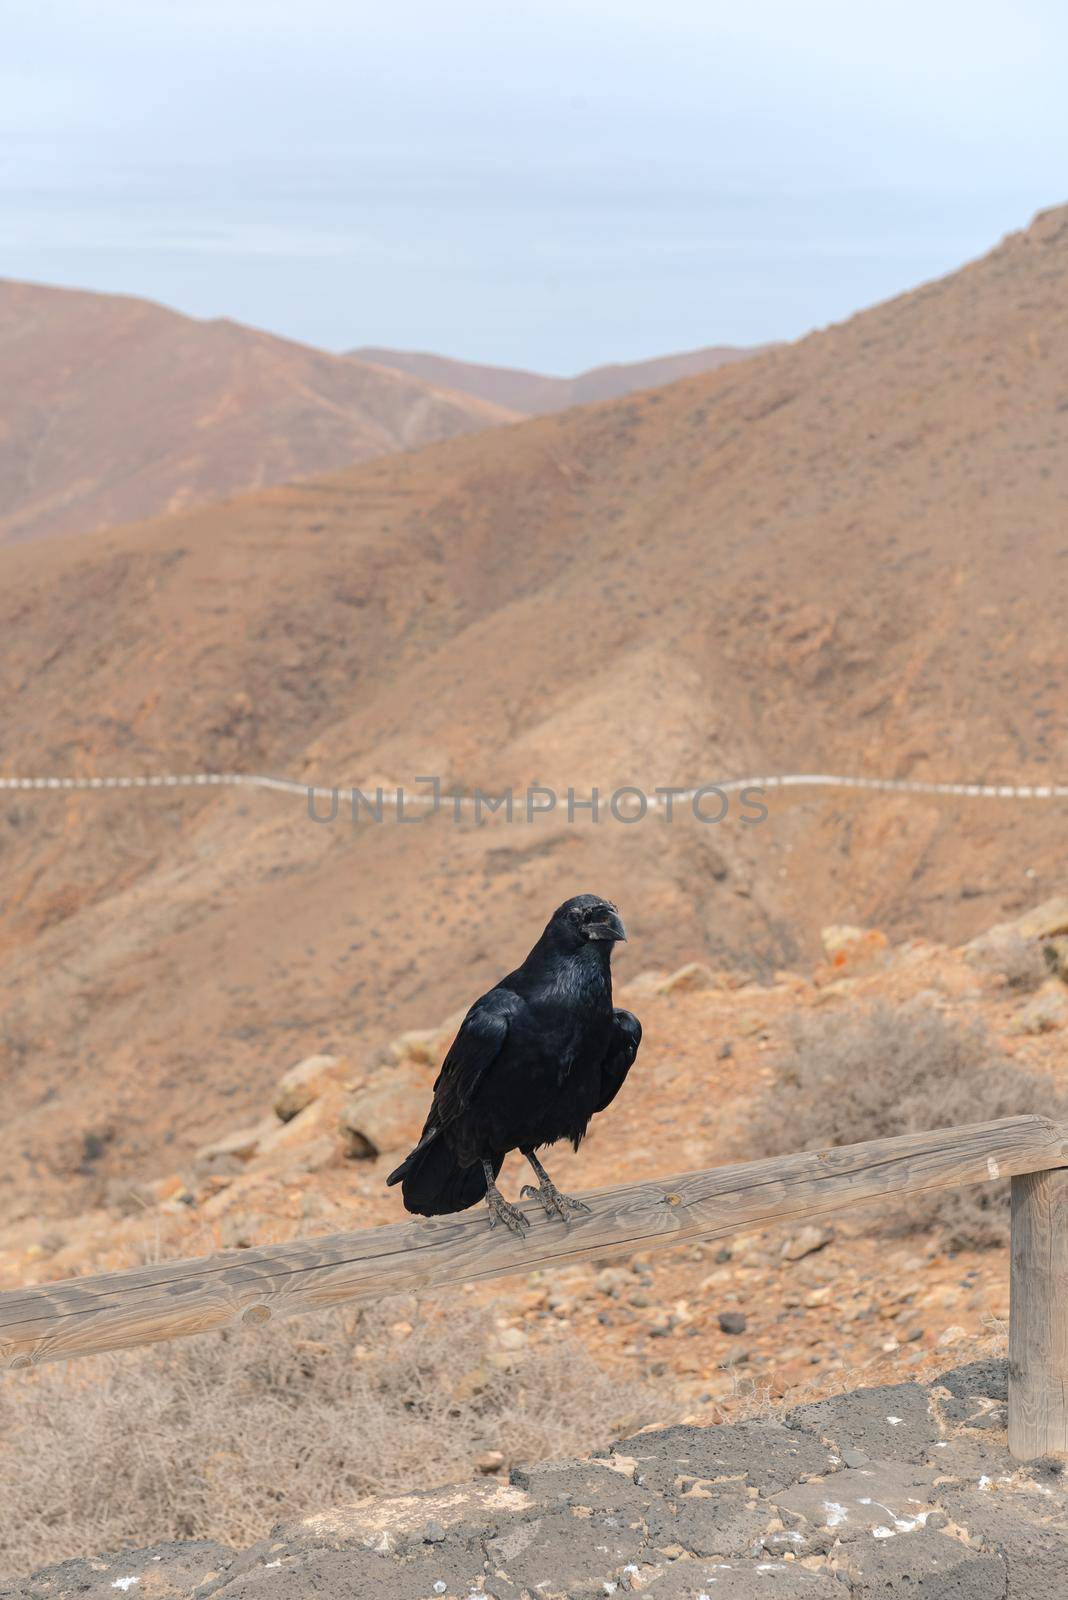 Crows on the Way from Bentacoria to Pajara on the island of Fuerteventura, Spain in summer 2020 by martinscphoto